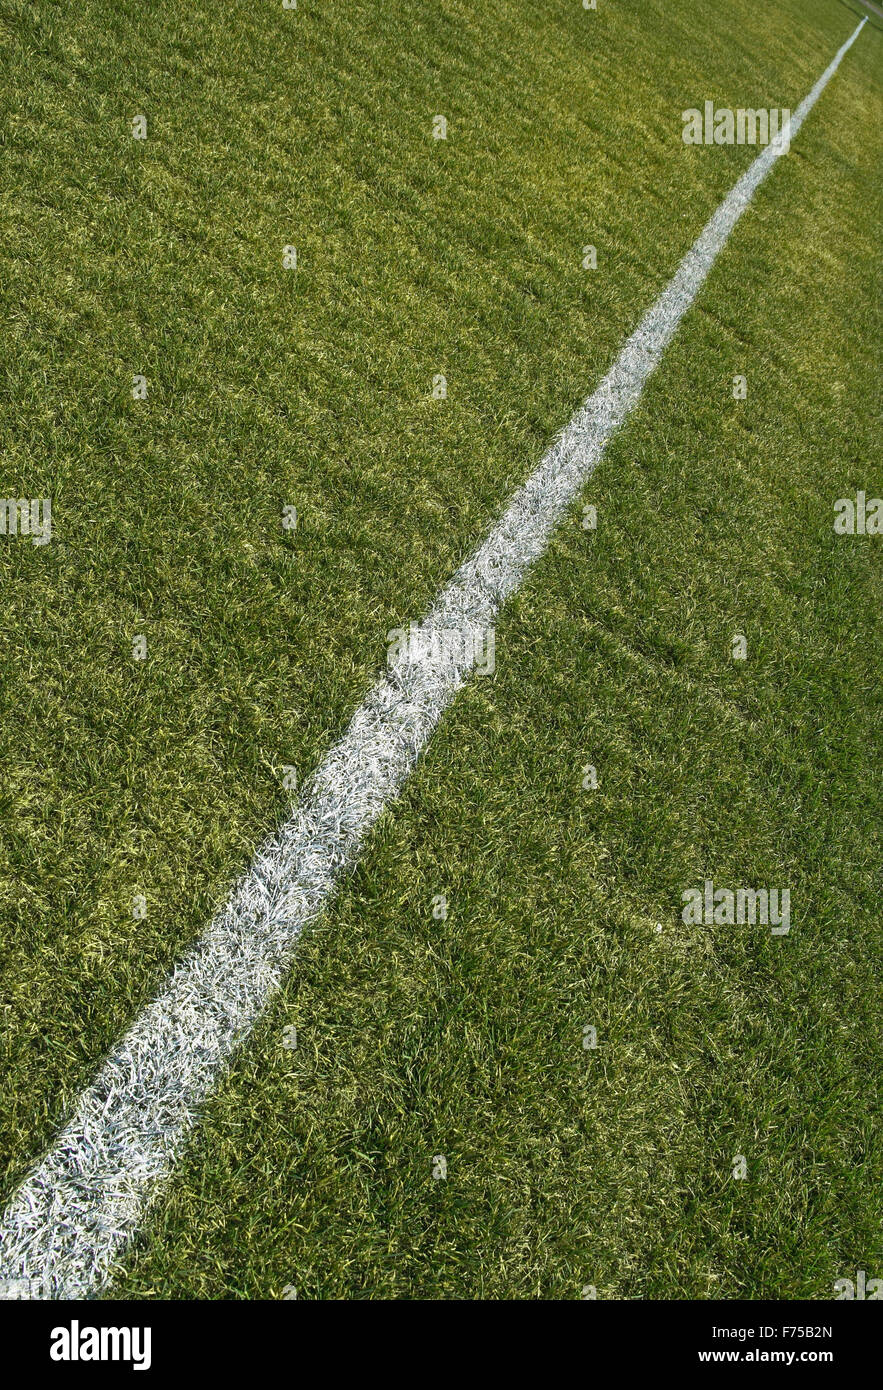 Boundary line of a green playing field Stock Photo